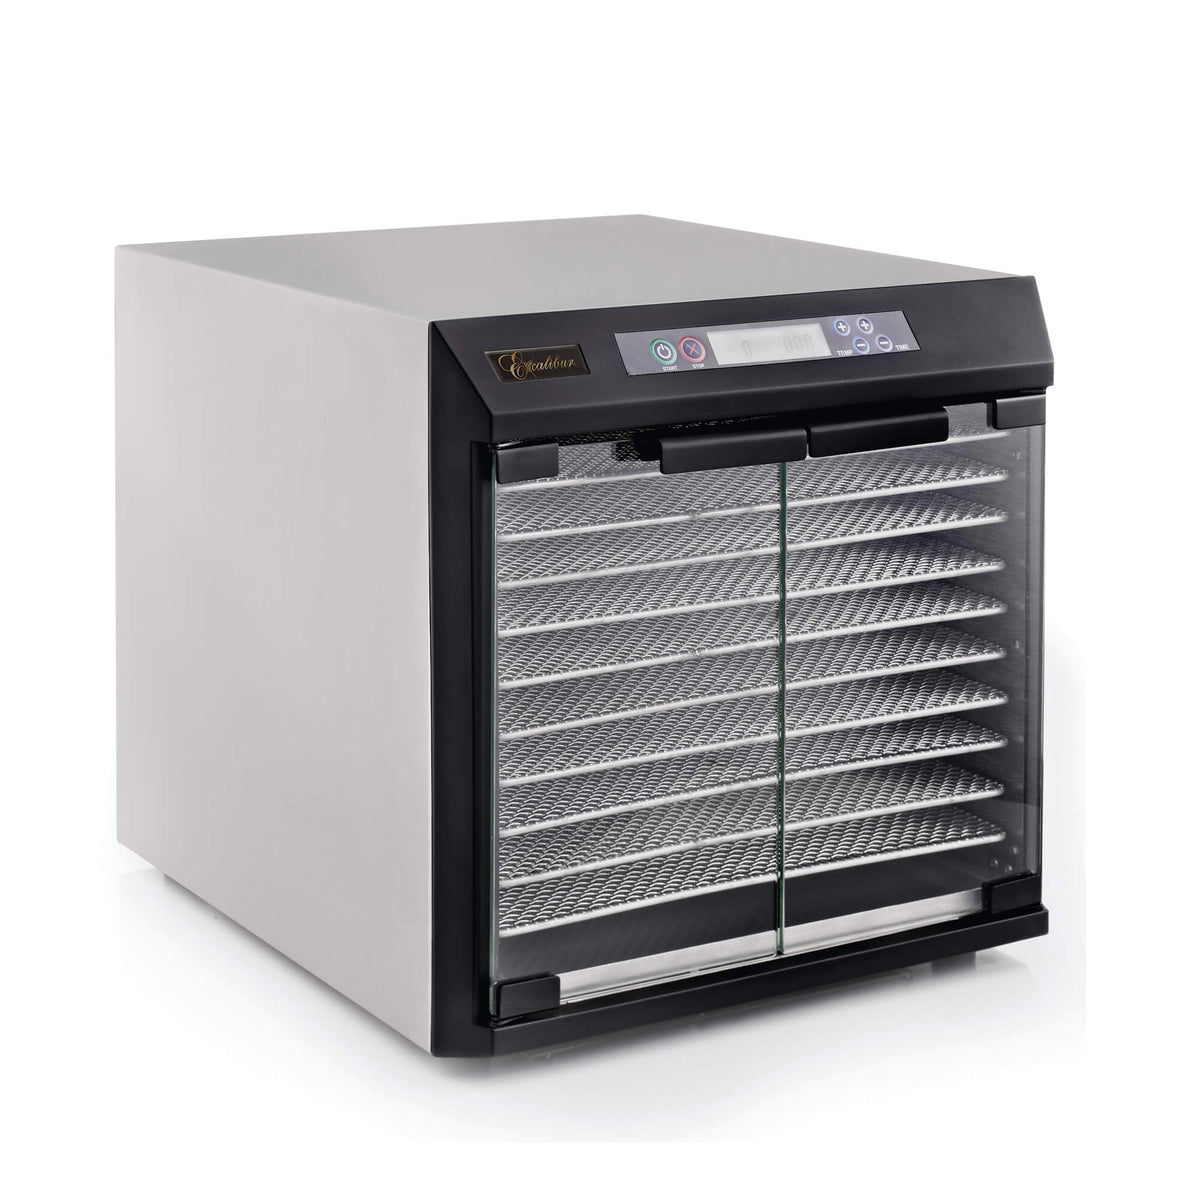 Excalibur EXC10EL 10 tray stainless steel digital dehydrator with glass armoured doors closed.